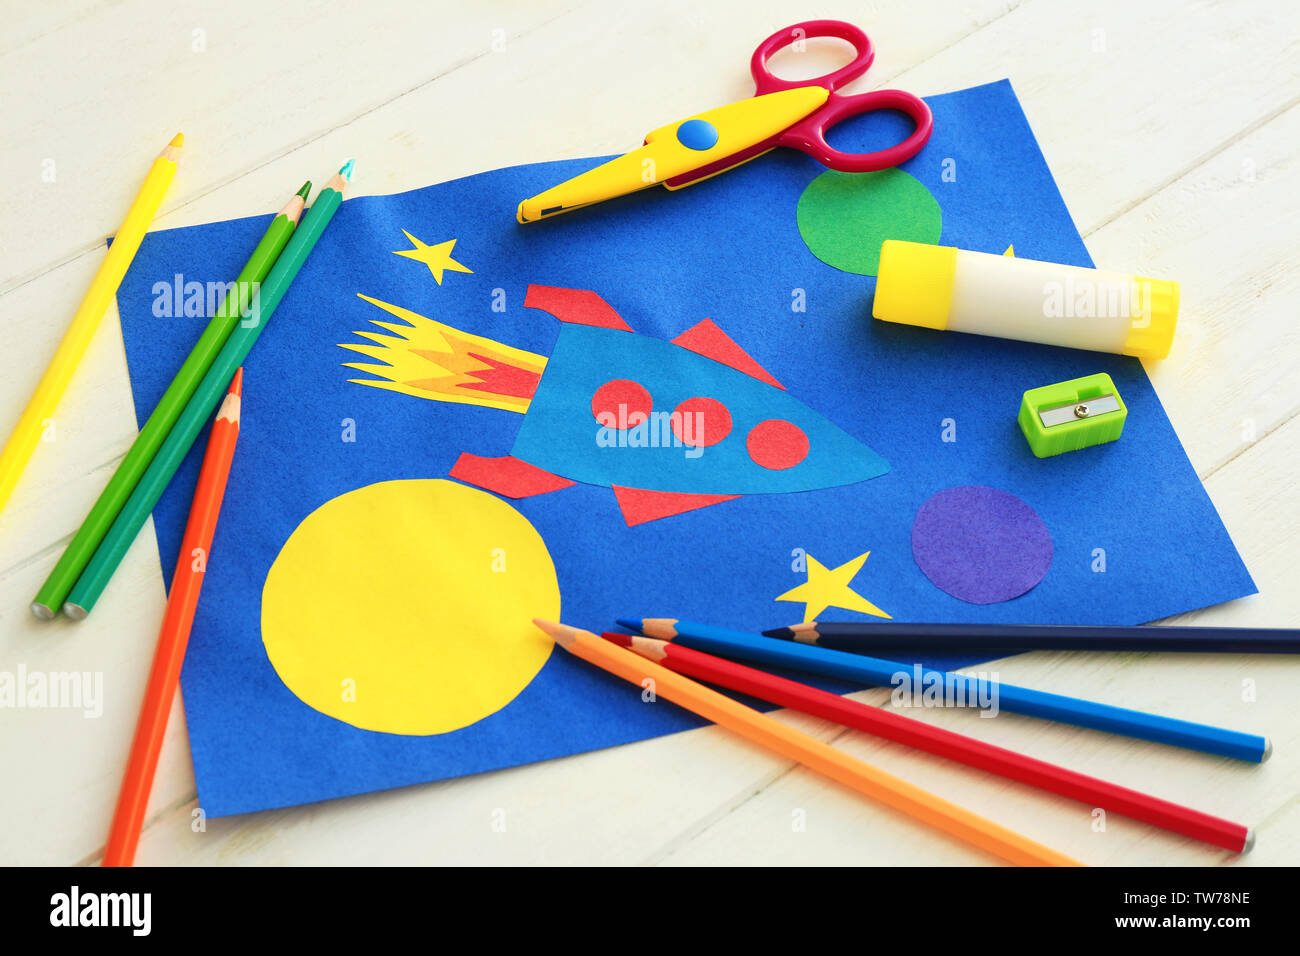 Child's applique of rocket on wooden table Stock Photo